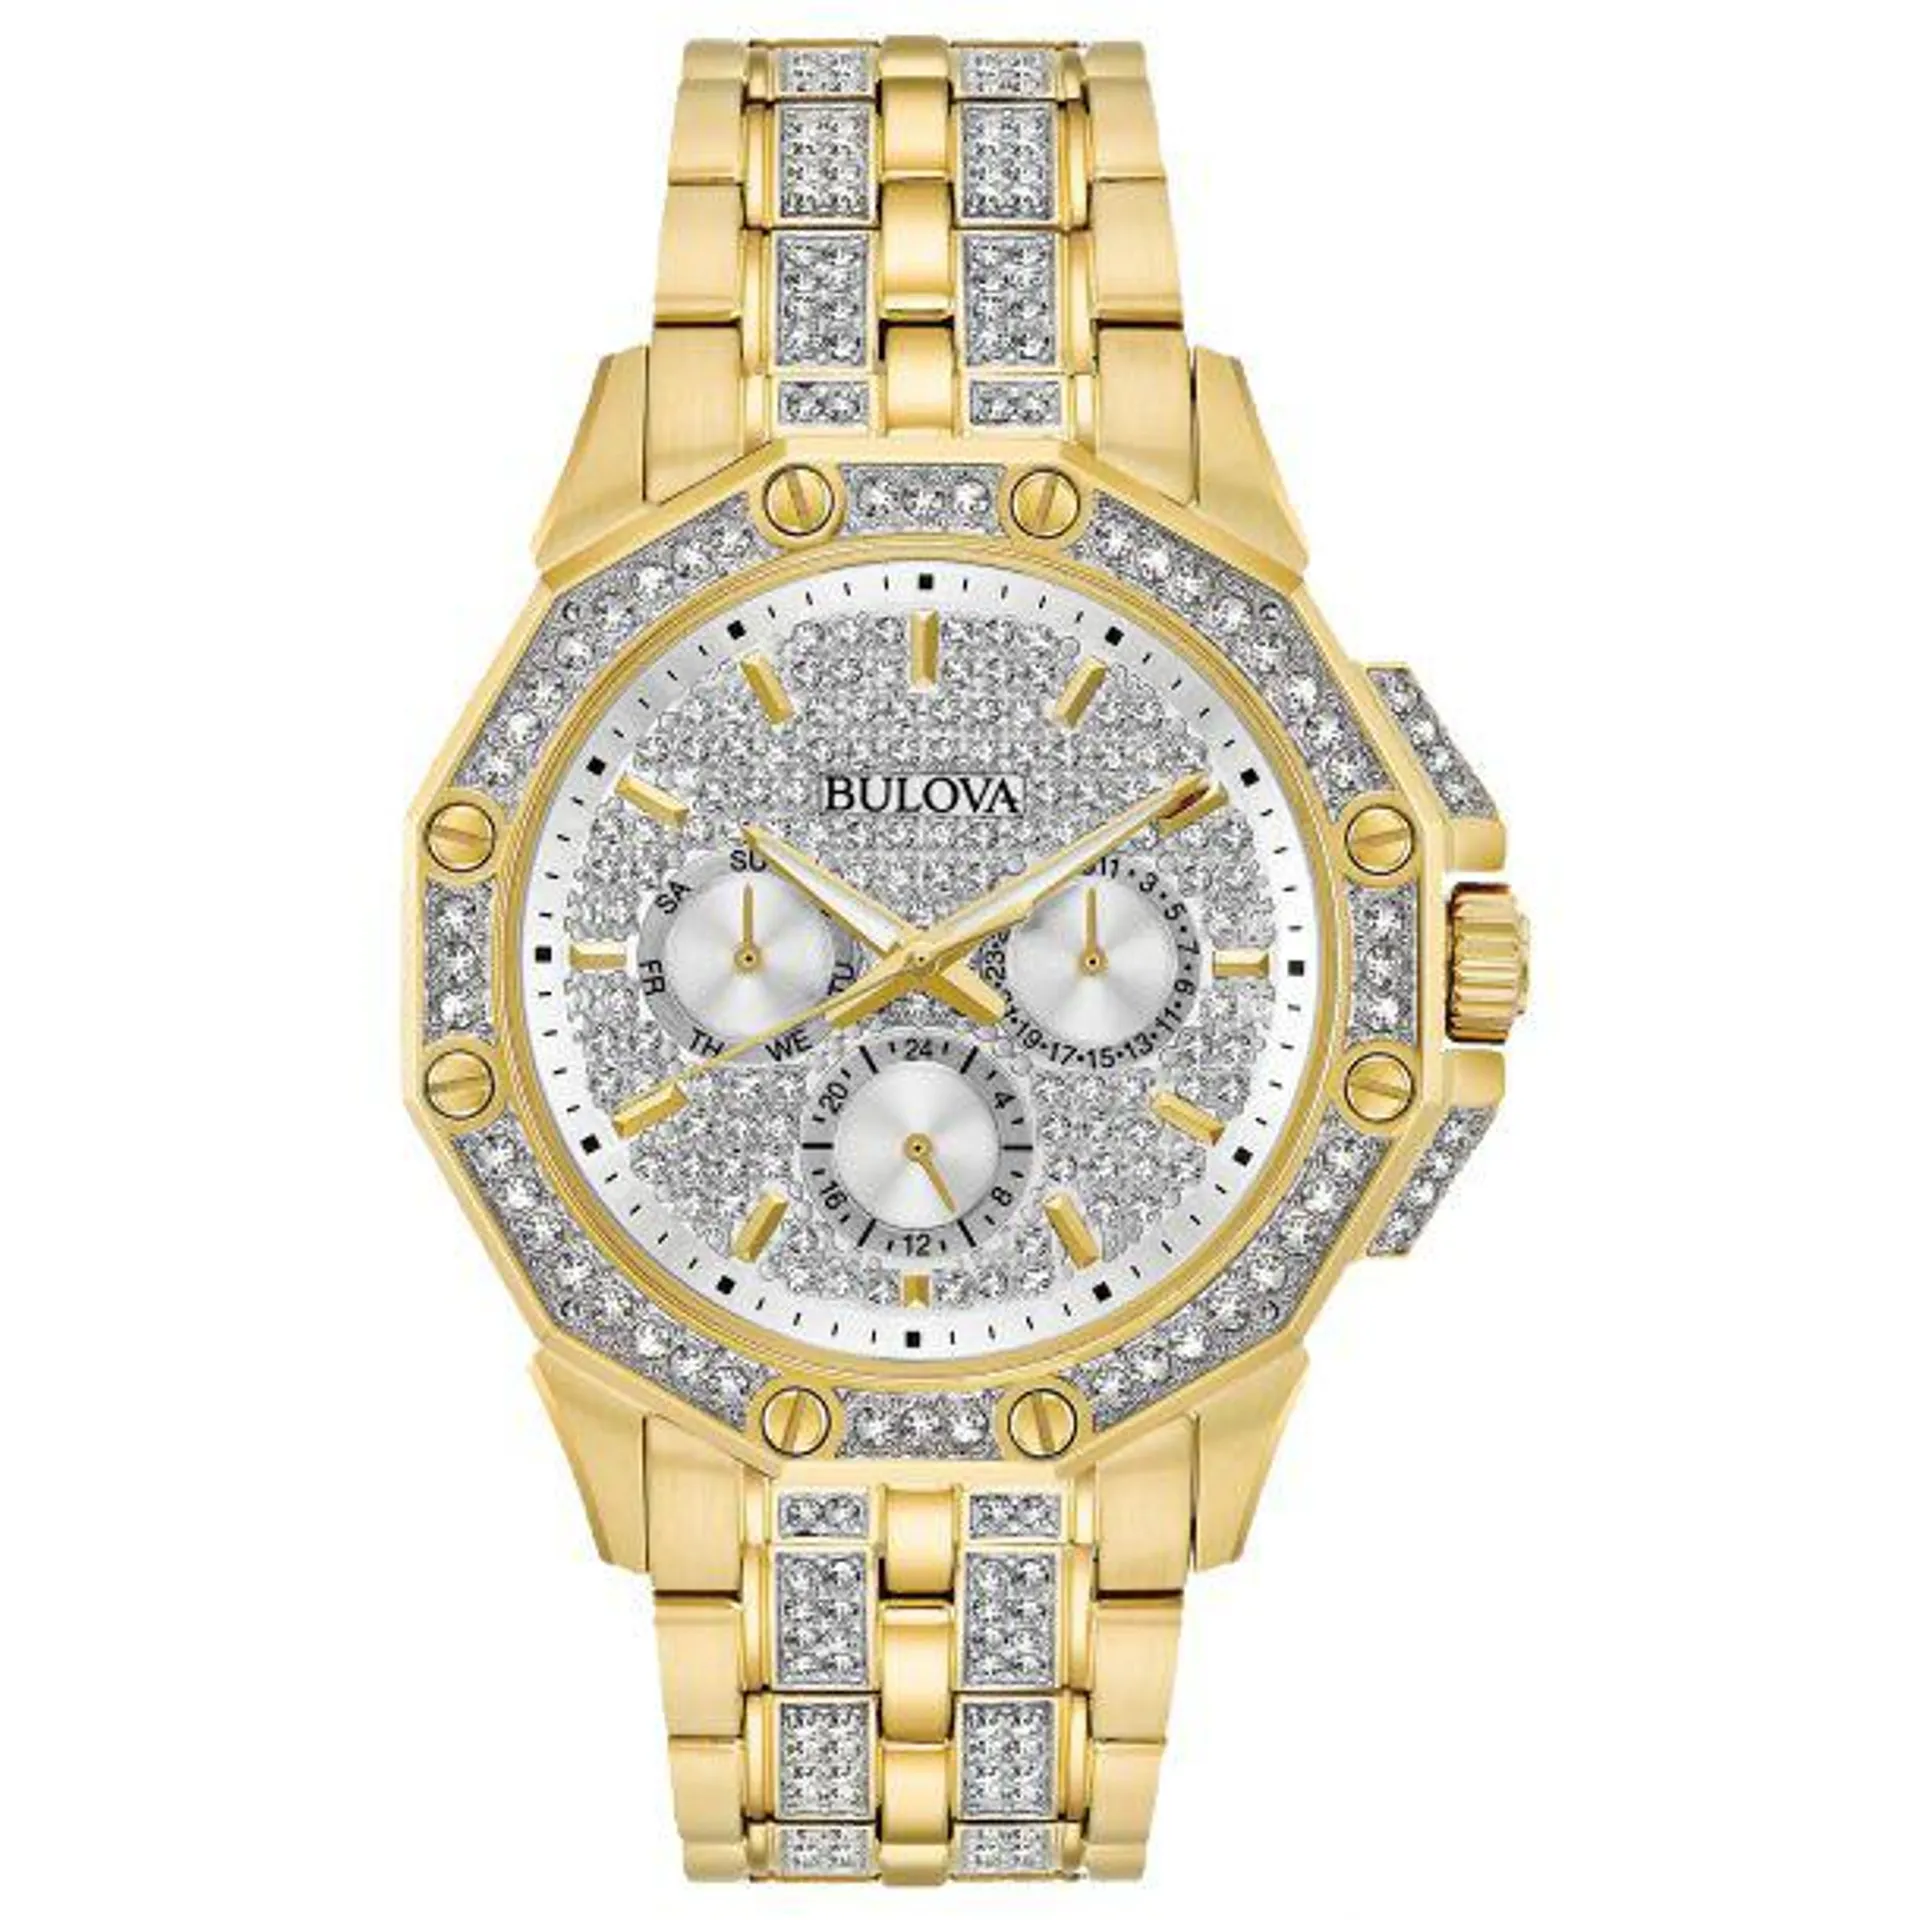 Bulova Men's Crystal Accented Silver Dial Stainless Steel Bracelet Watch - Gold